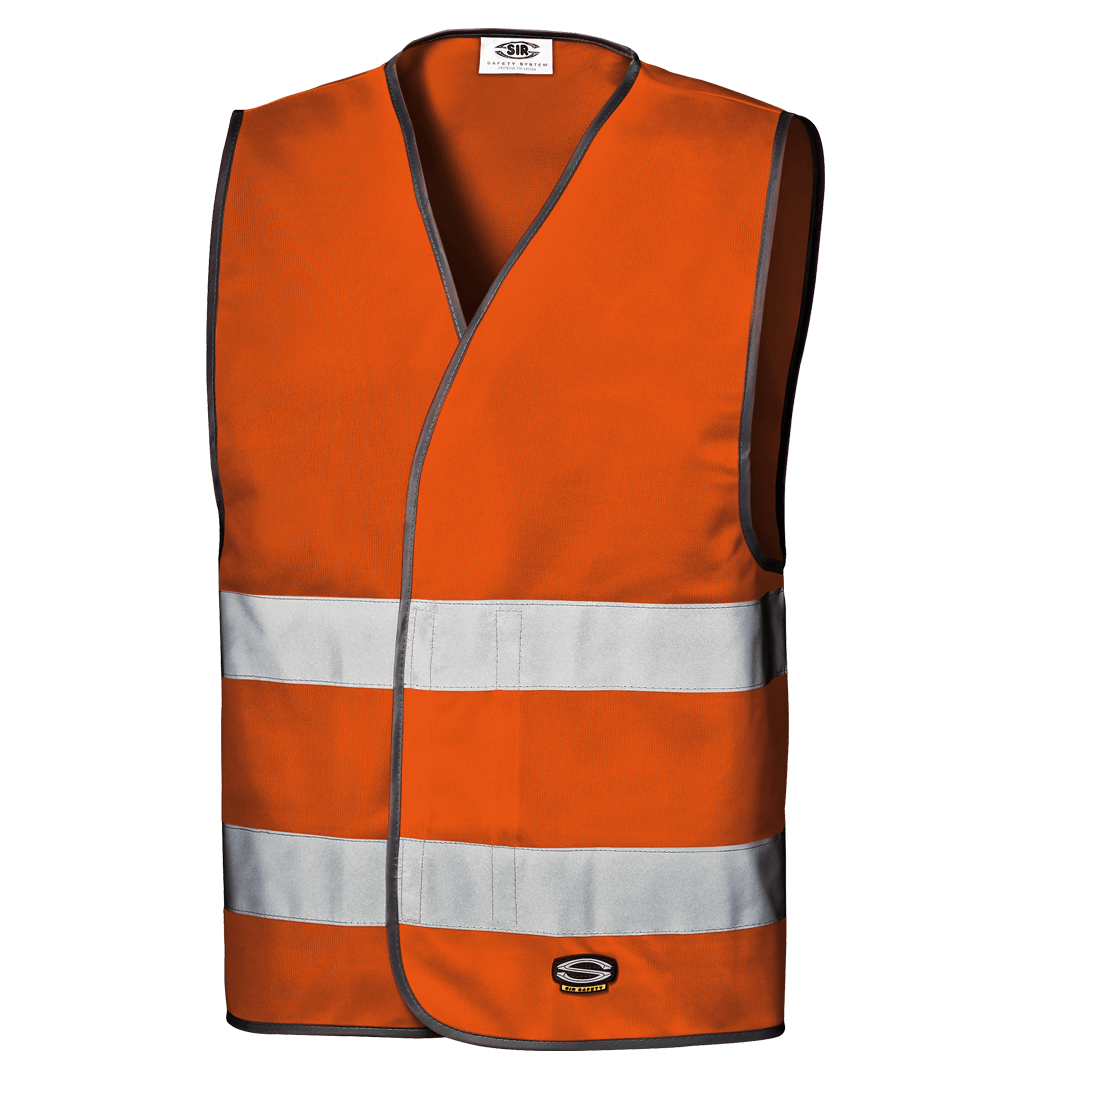 High Visibility Reflective Safety Vest Zipper Front with 5 Pockets Yel –  Shipyard supplies, Inc